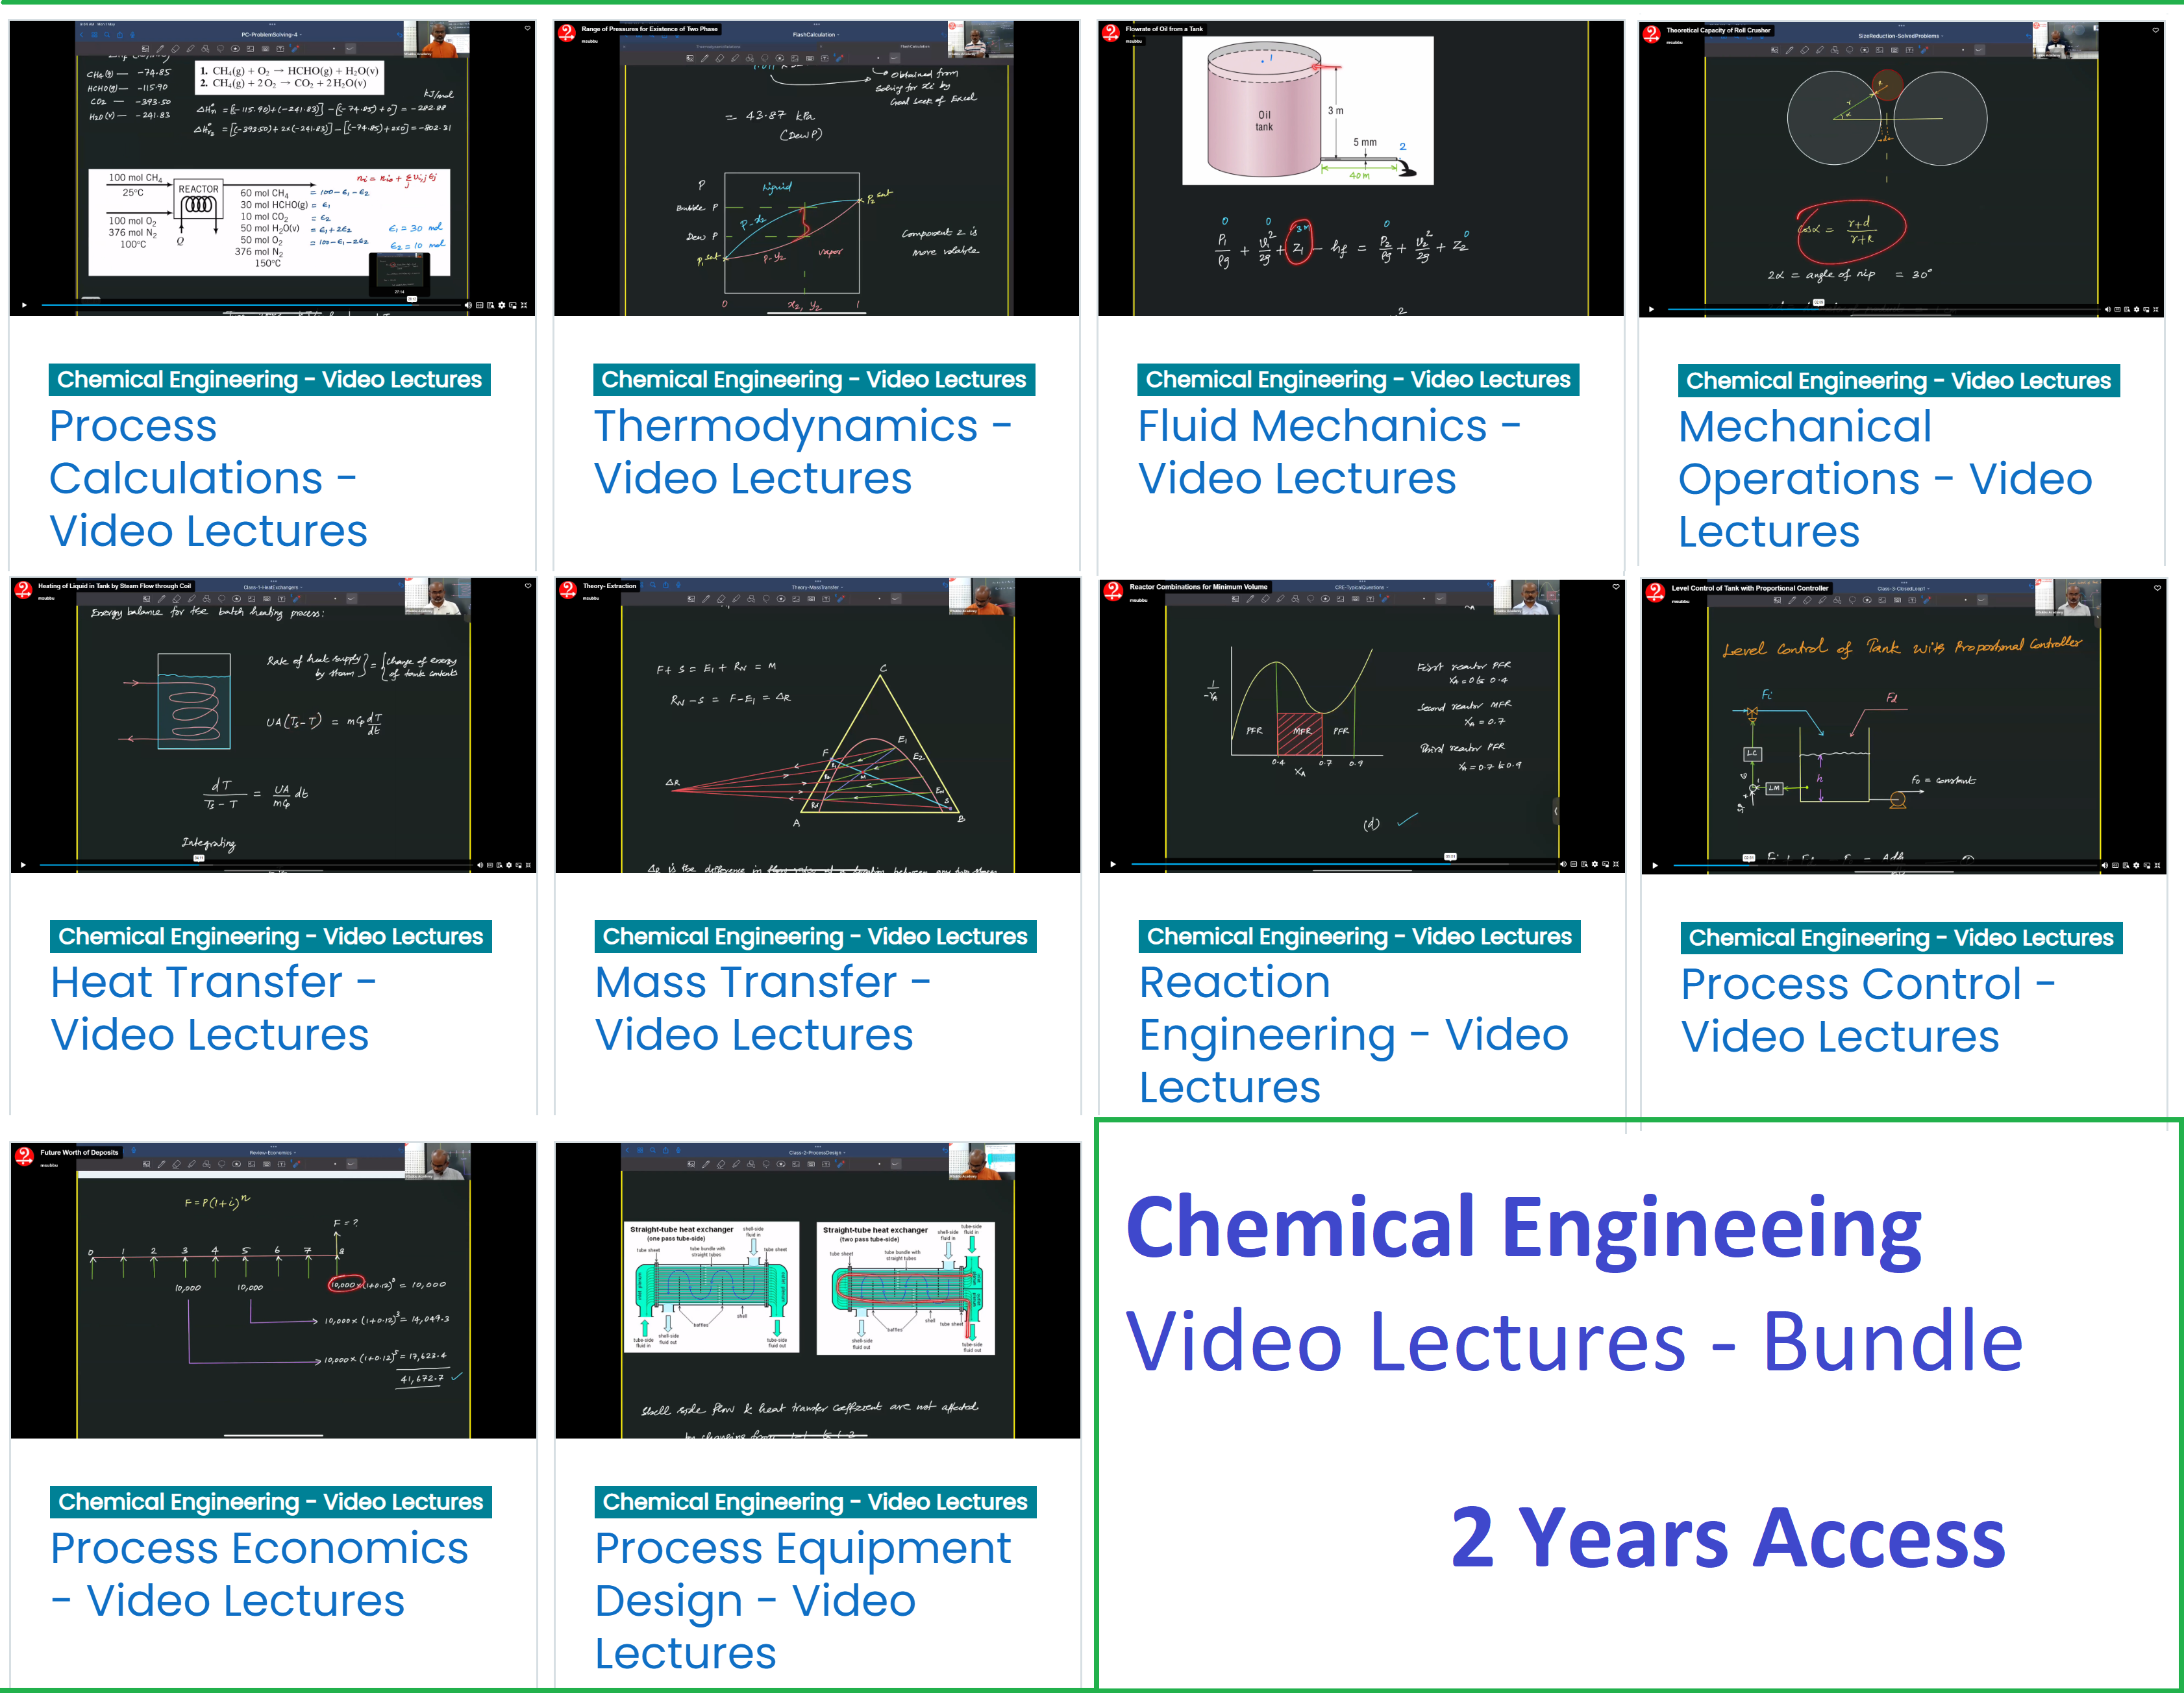 Chemical Engineering Video Lectures Bundle - 2 Years Access